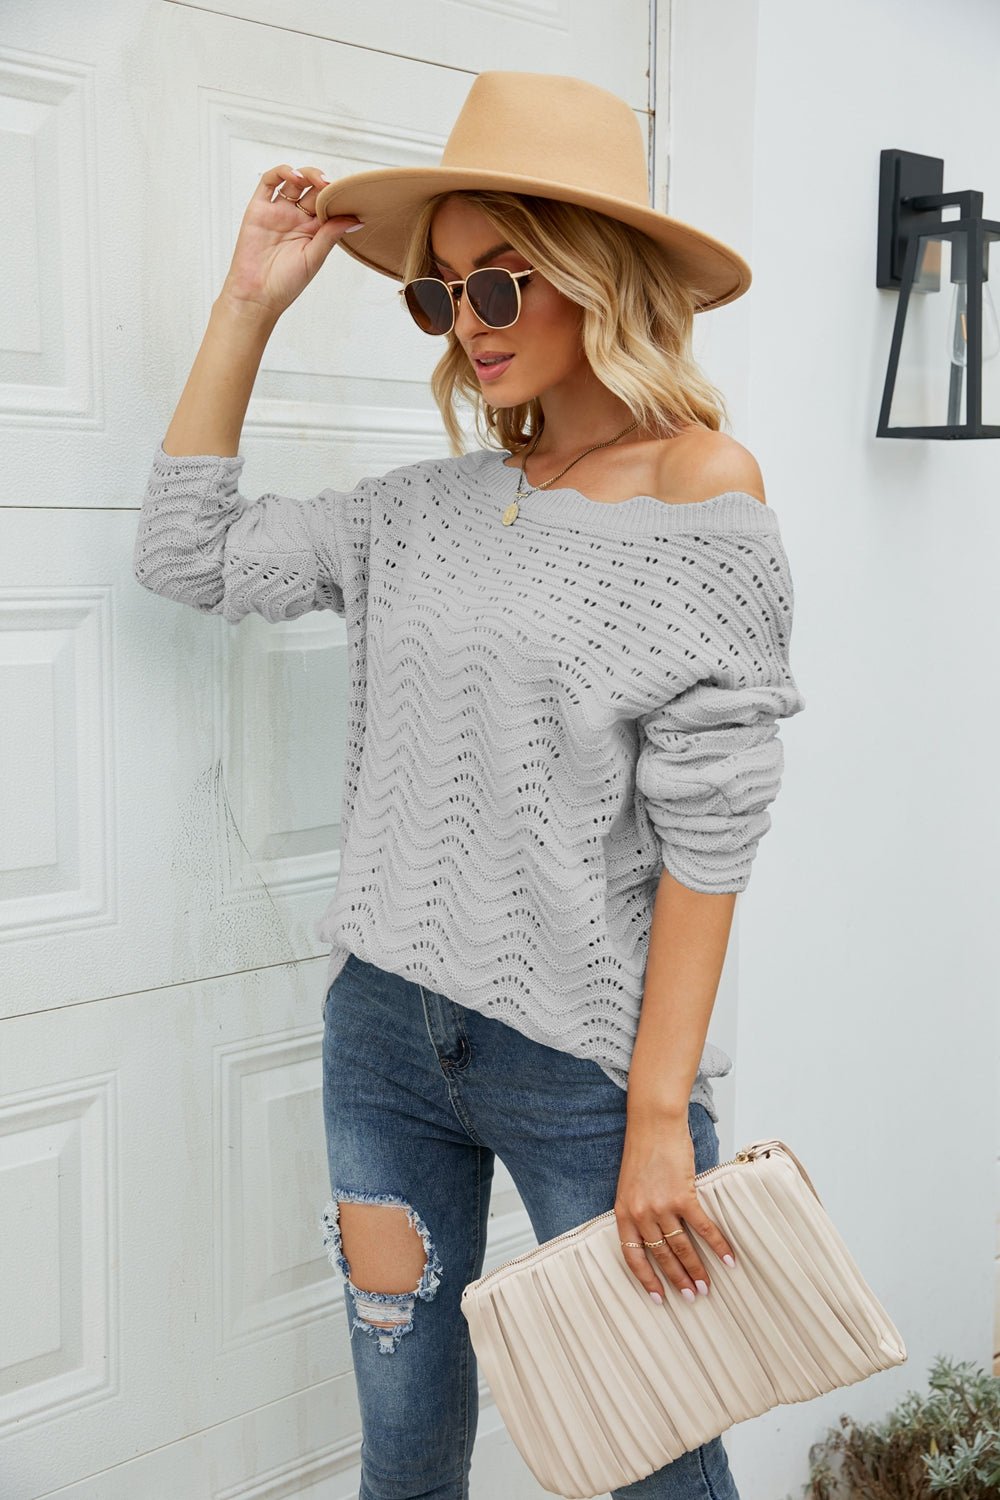 Scalloped Boat Neck Openwork Tunic Sweater  | KIKI COUTURE-Women's Clothing, Designer Fashions, Shoes, Bags